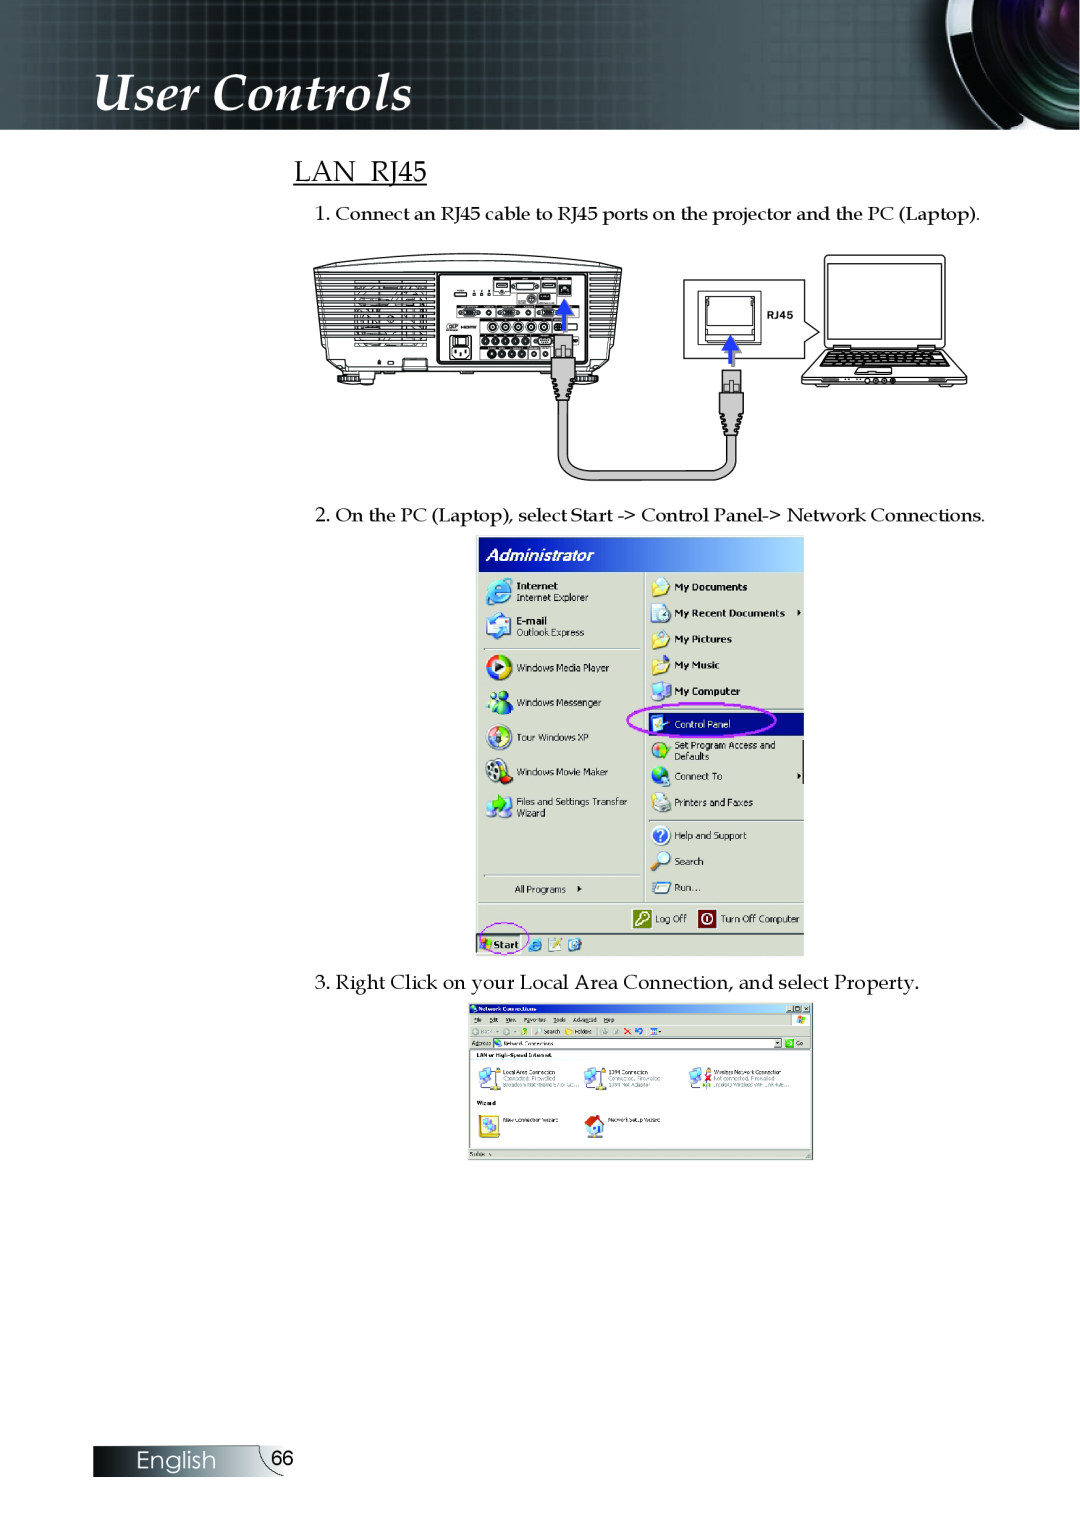 Optoma Technology EH505 LANRJ45, User Controls, English, Right Click on your Local Area Connection, and select Property 